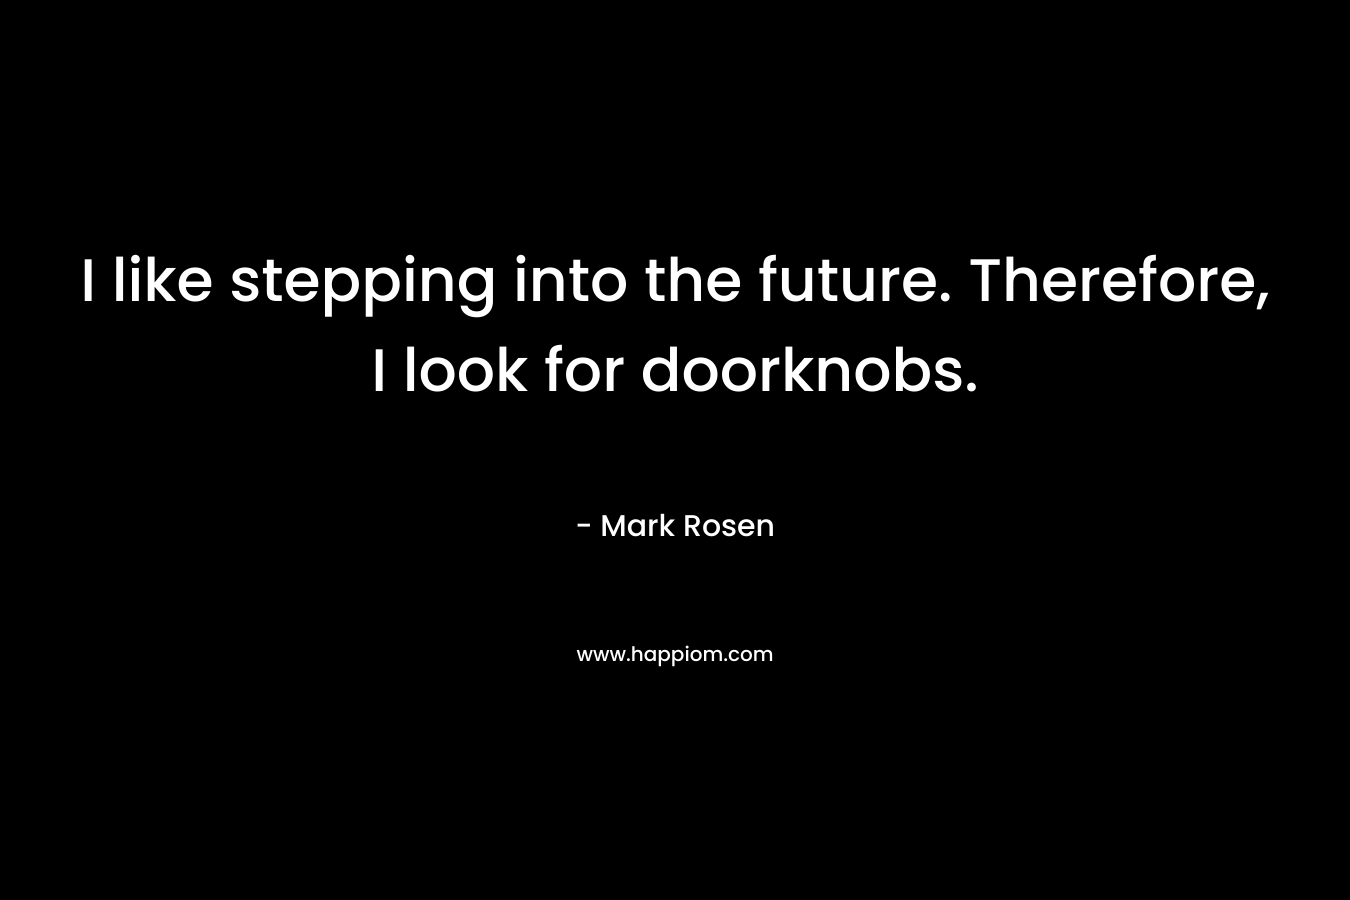 I like stepping into the future. Therefore, I look for doorknobs. – Mark Rosen